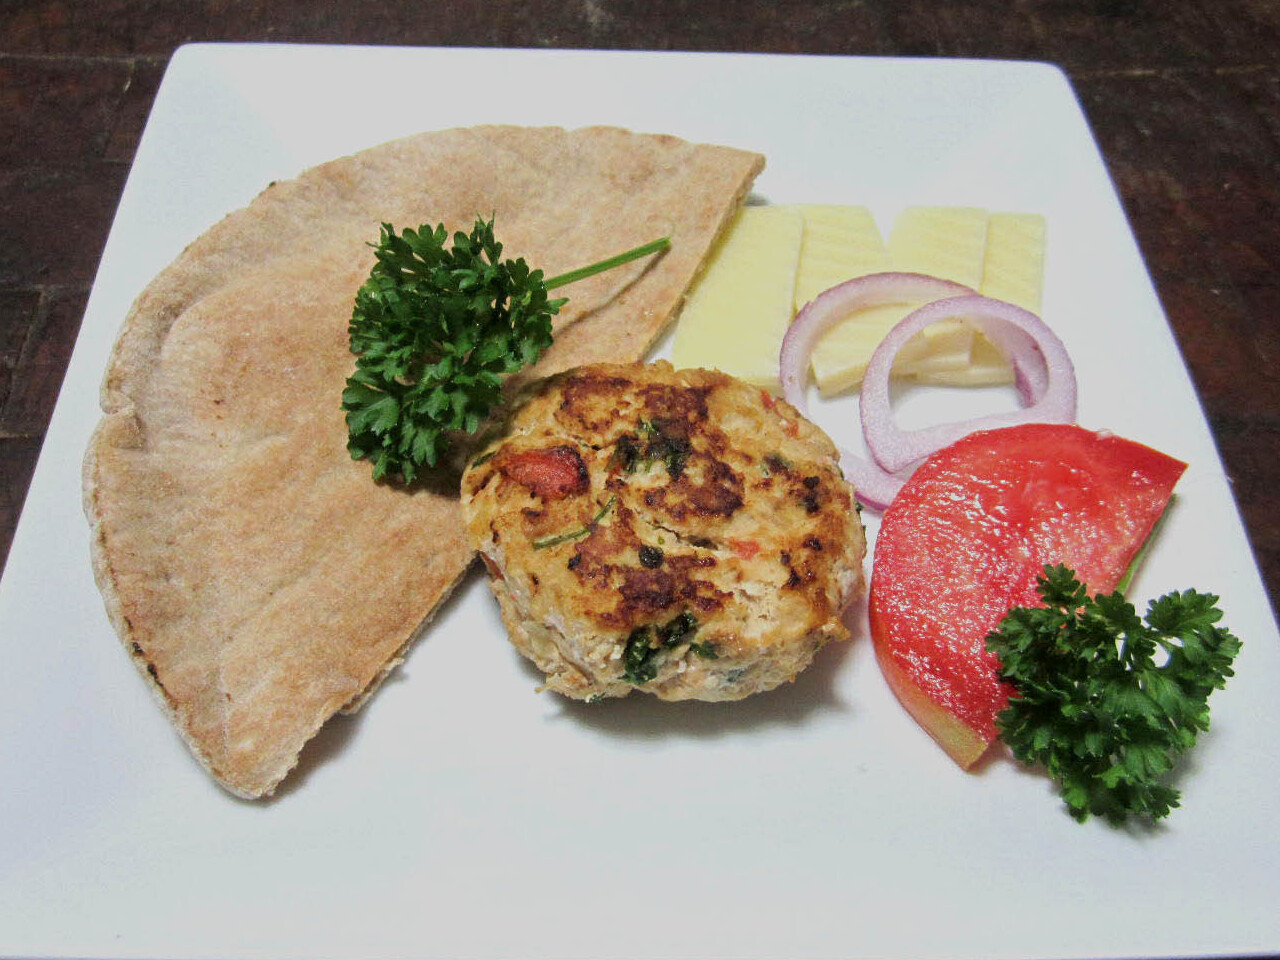 Tomato parsley burger with pita bread, parsley, cheese, red onion, and a slice of tomato